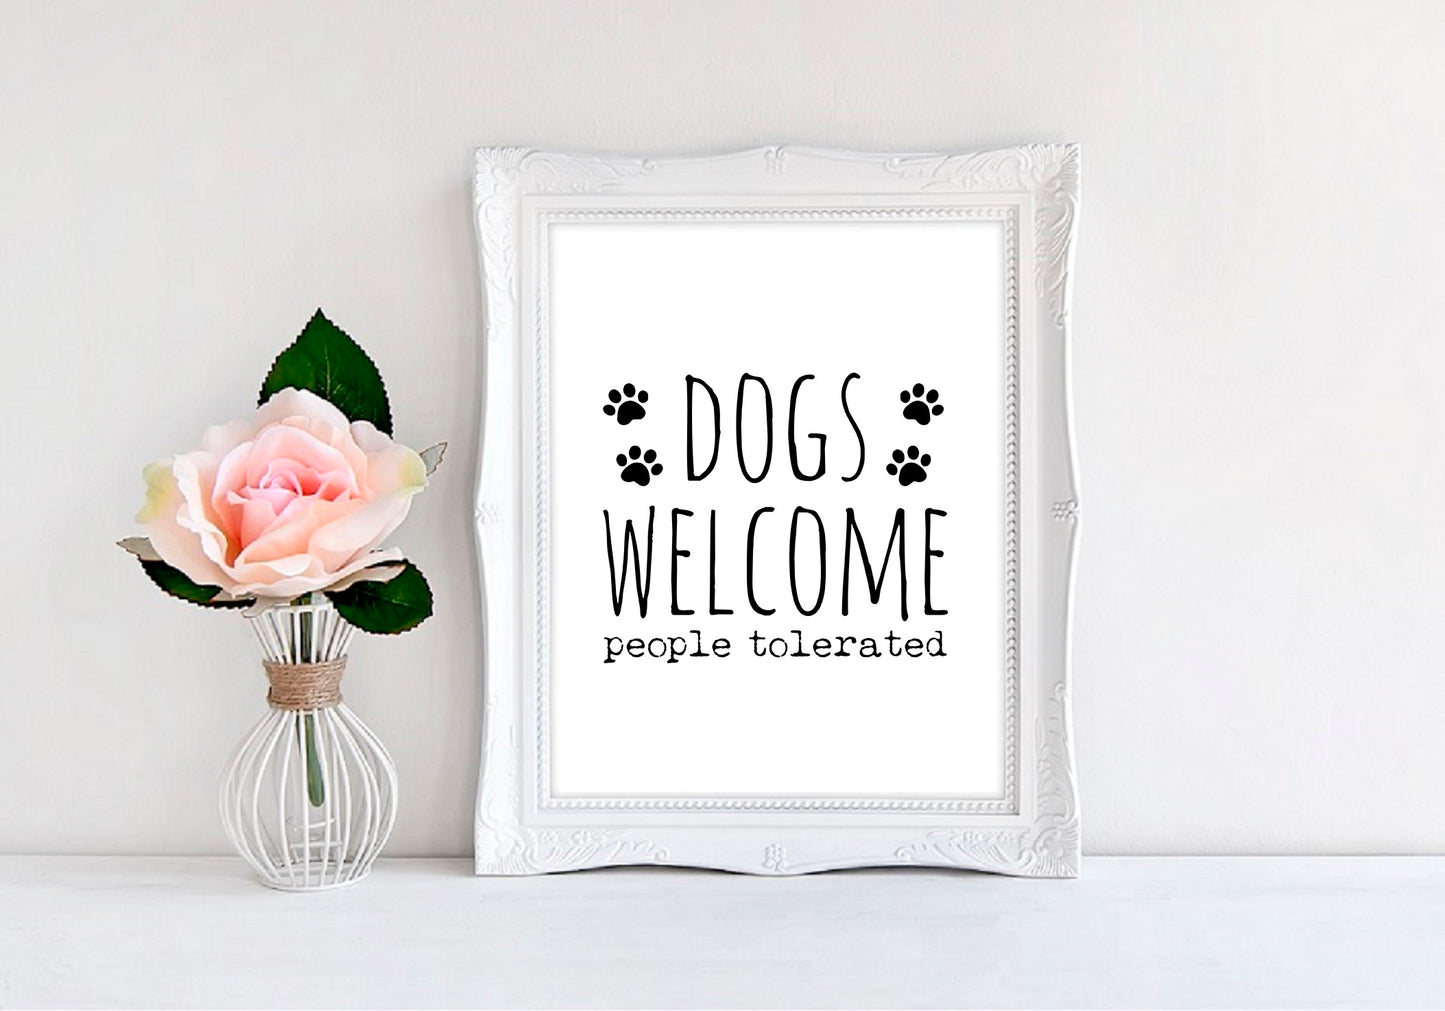 Dogs Welcome, People Tolerated - 8"x10" Wall Print - MoonlightMakers